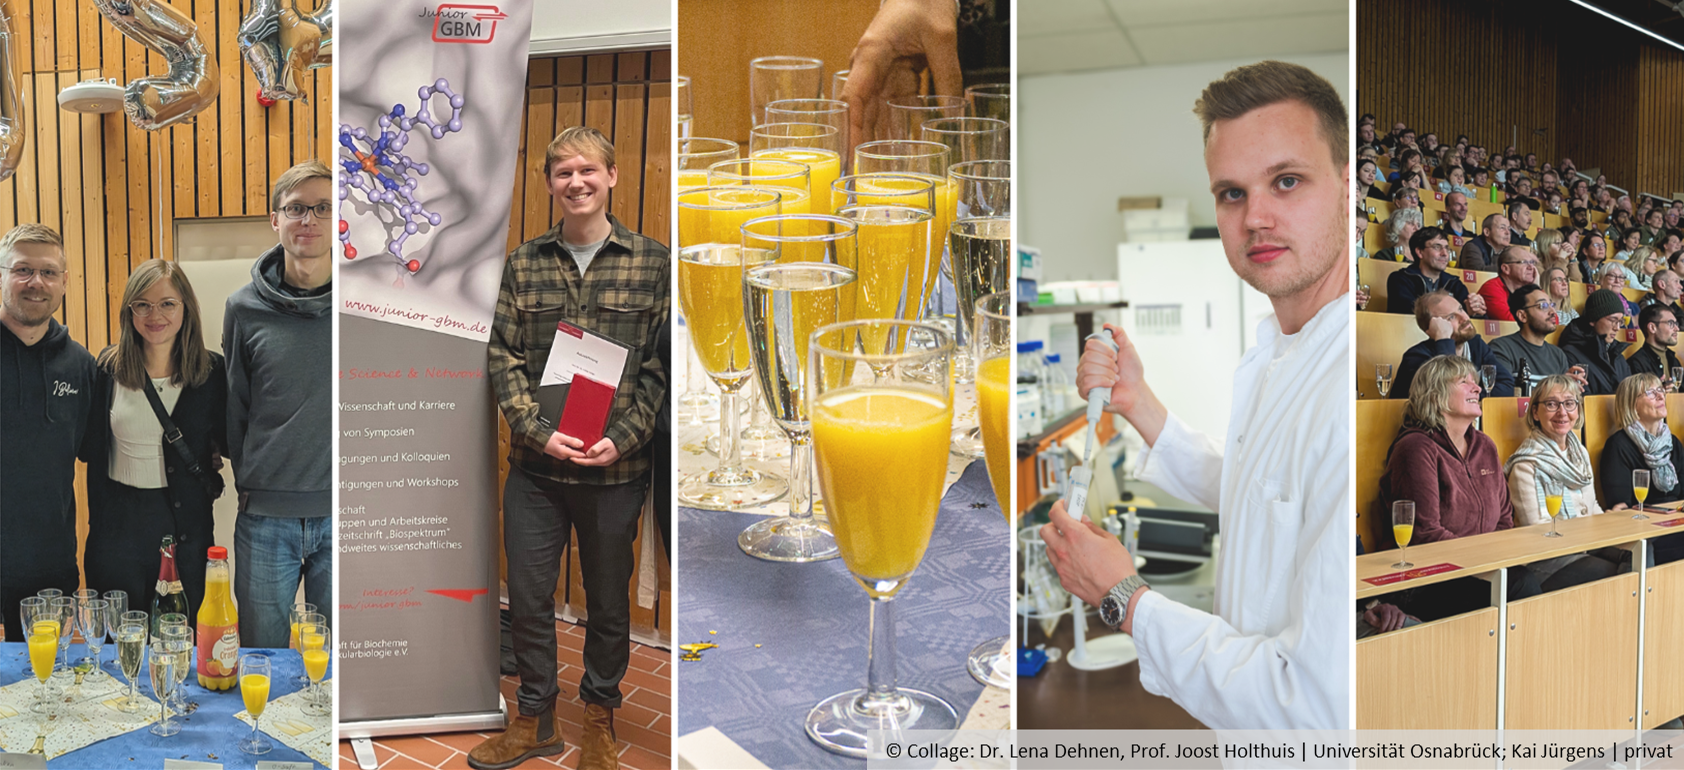 A collage showing smiling people behind a table, a smiling man with a document in his hands, glasses with sparkling wine and orange juice, a man working in a laboratory and people sitting in a lecture hall.